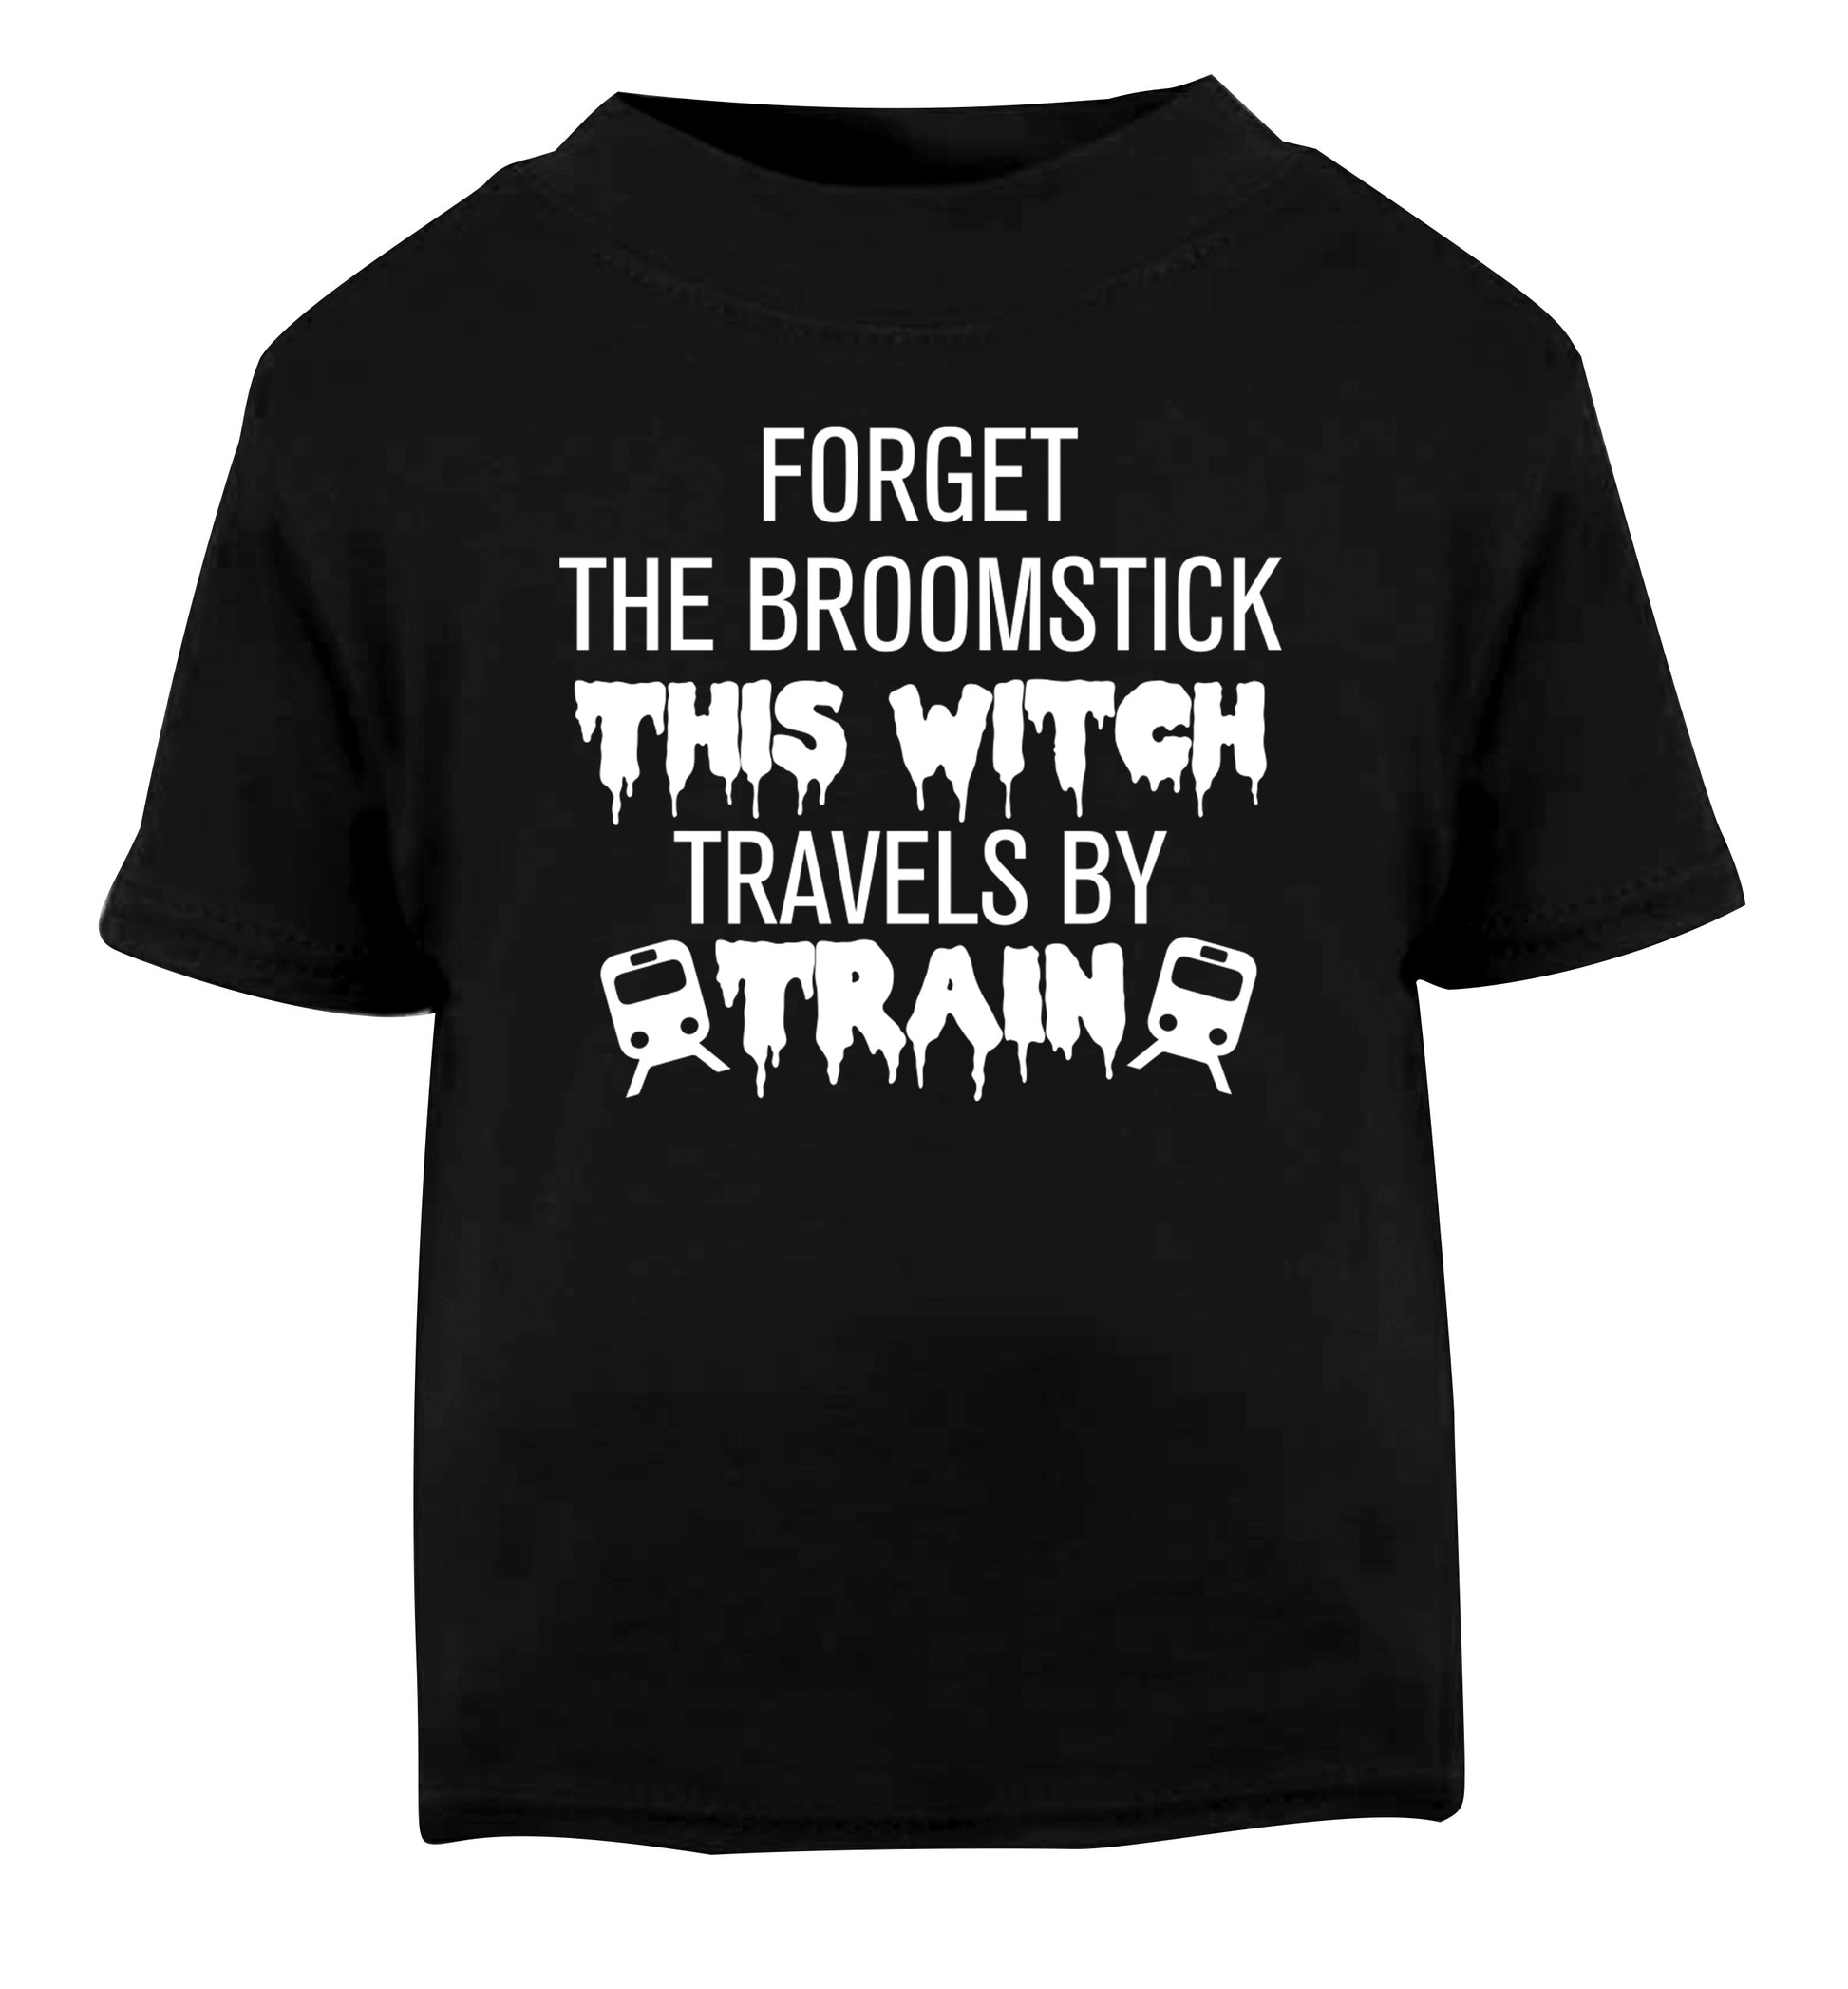 Forget the broomstick this witch travels by train Black Baby Toddler Tshirt 2 years